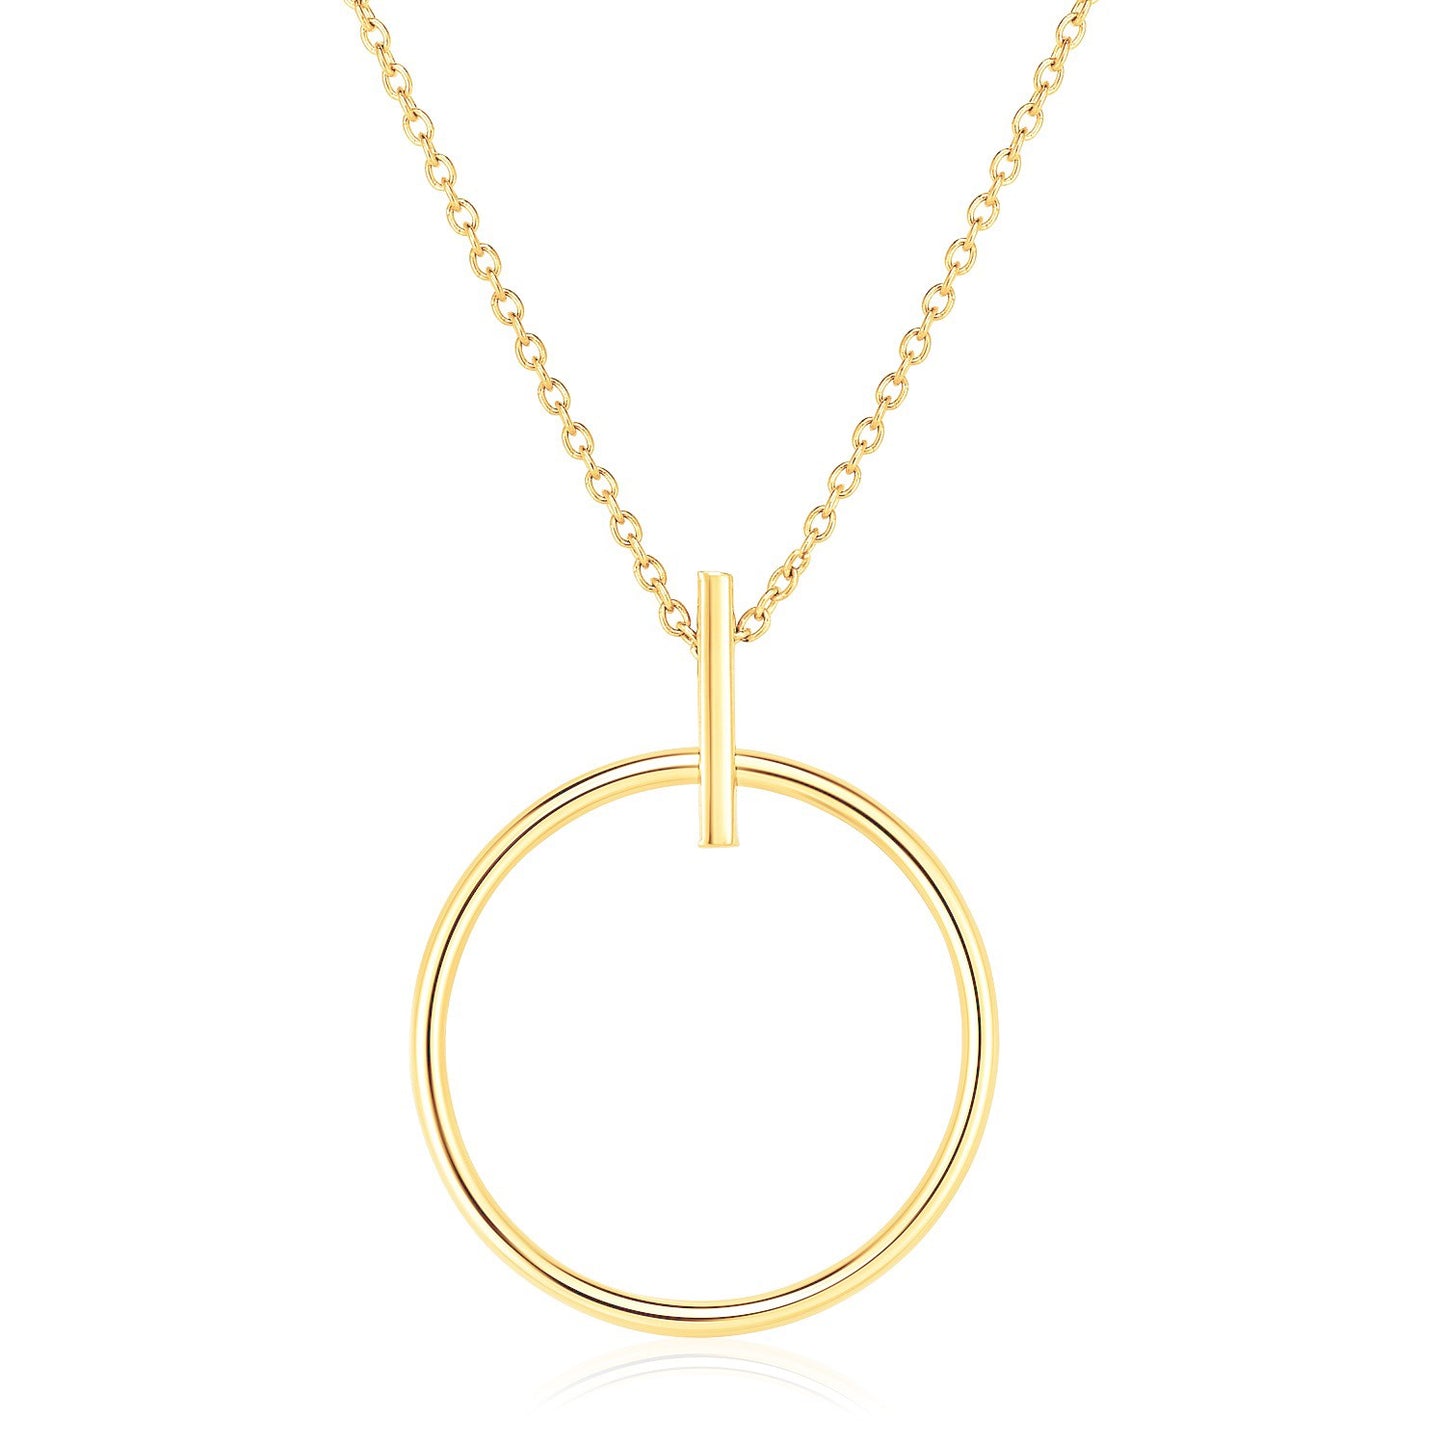 14k Yellow Gold 17 inch Necklace with Polished Ring Pendant